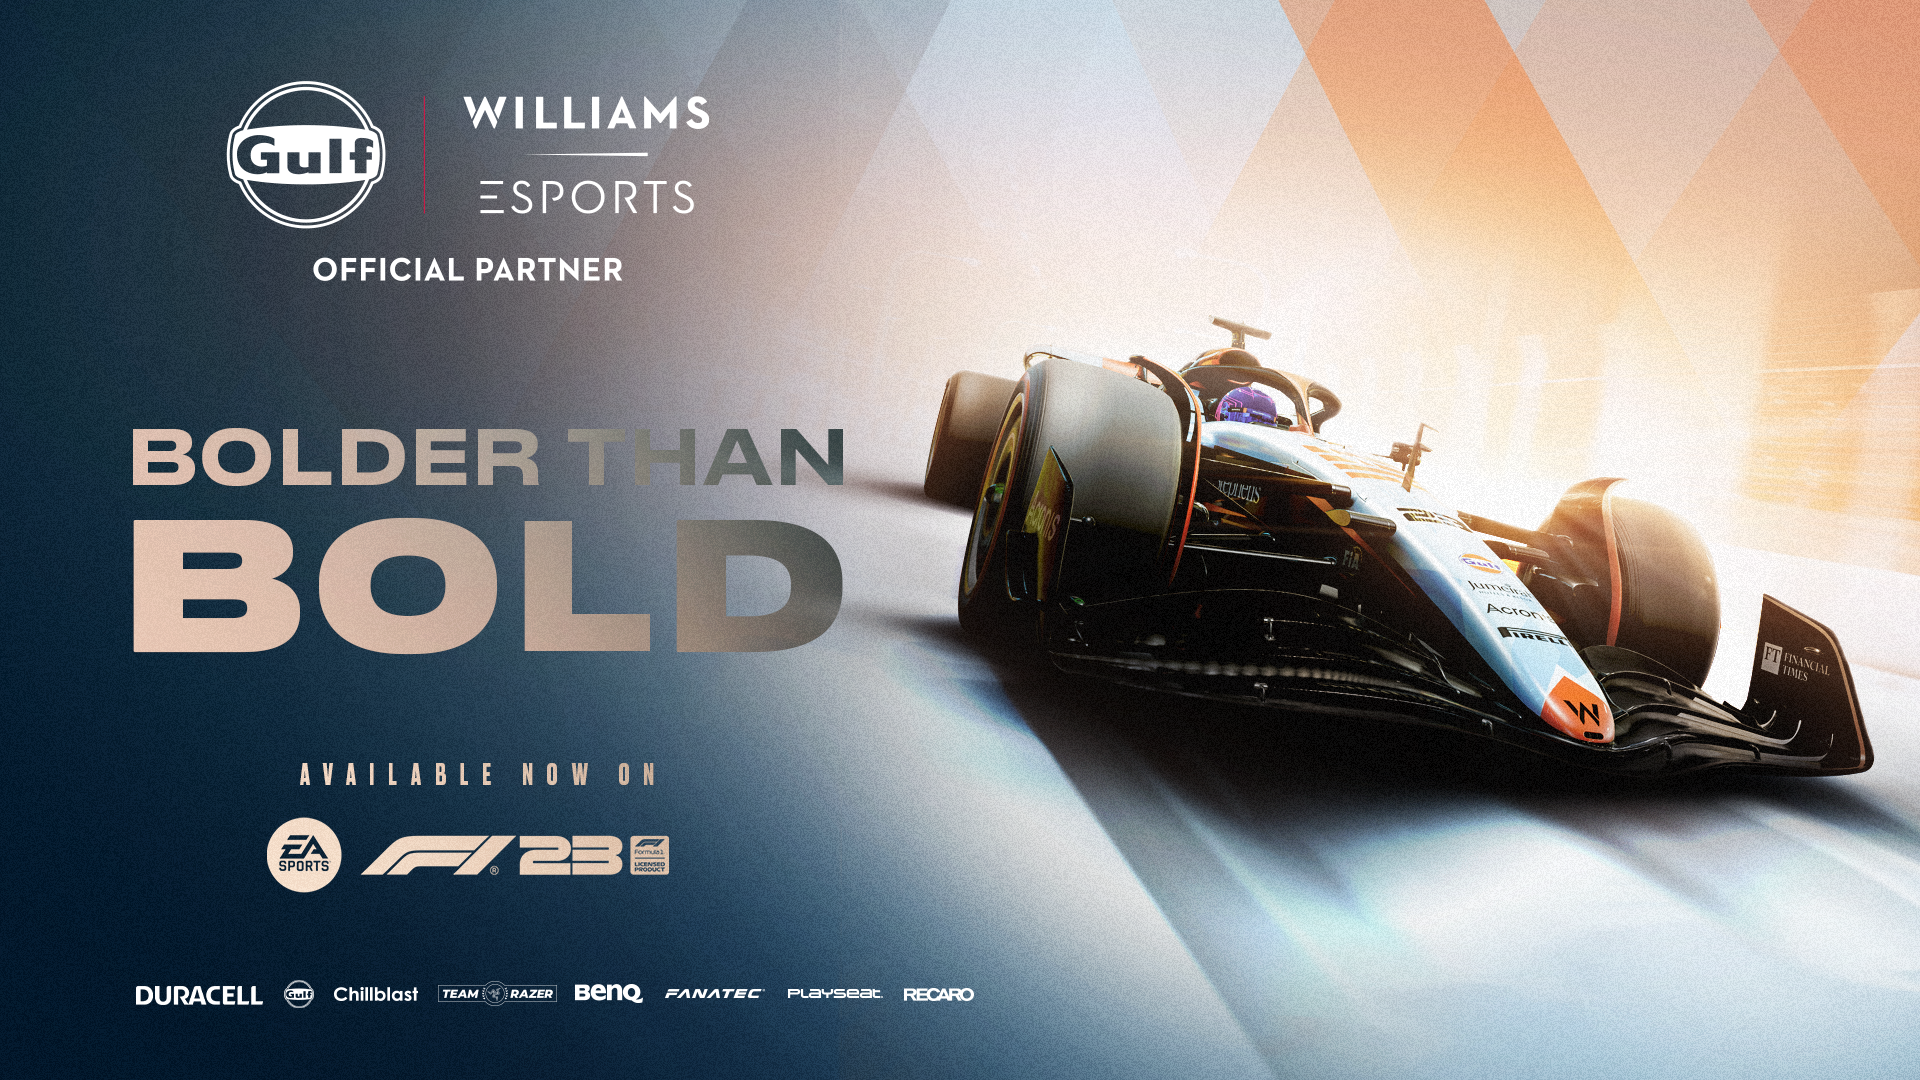 Williams Esports Challenge Alex Albon to a Time Trial! Williams Racing